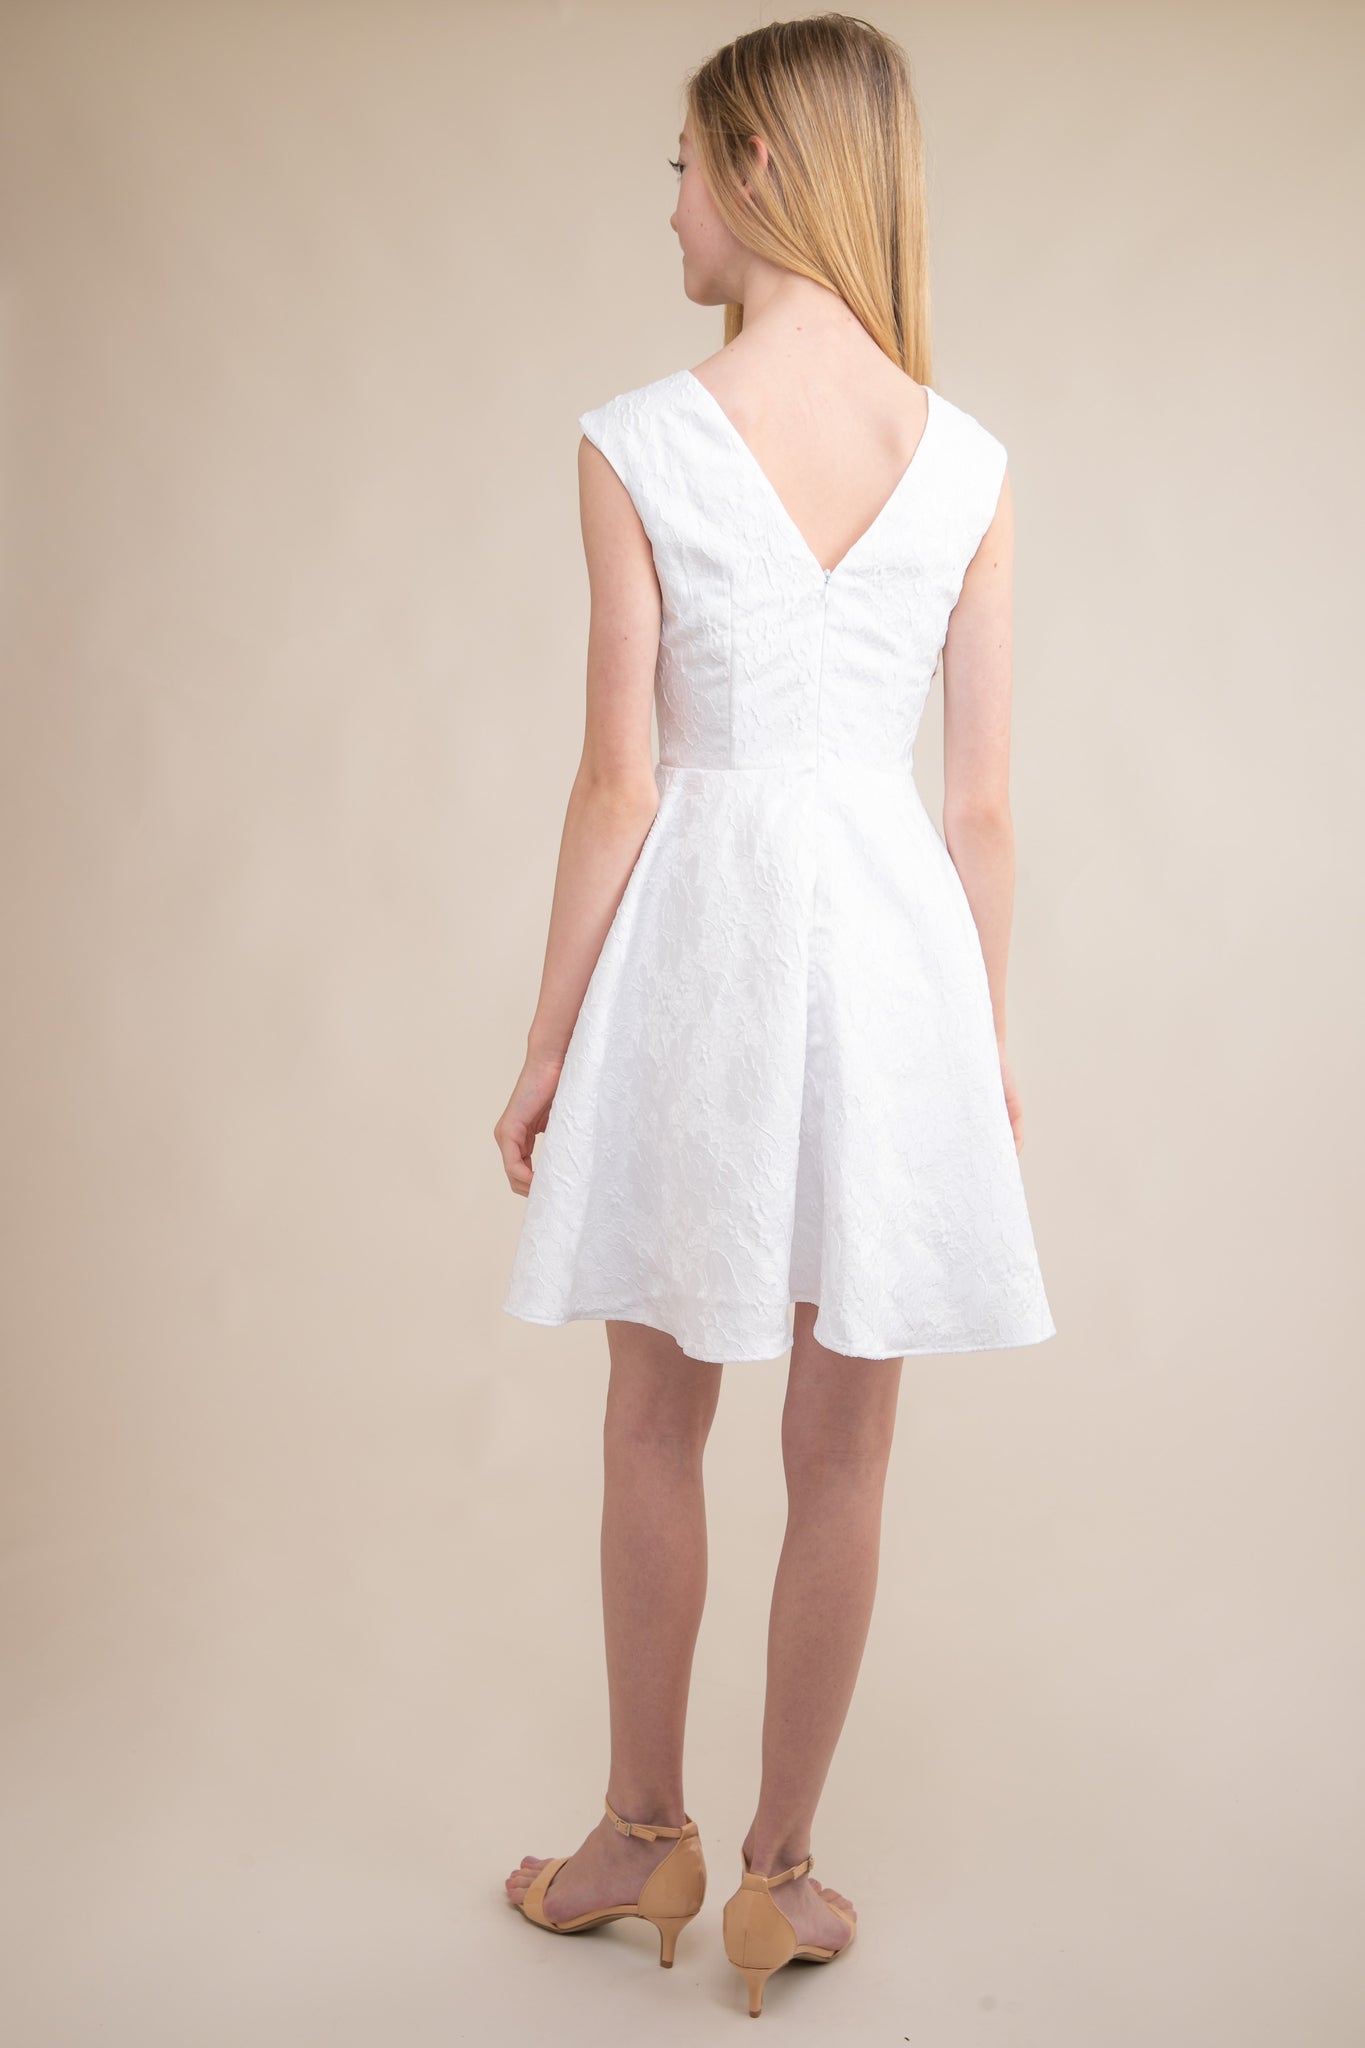 This is an all over jacquard, cap sleeve dress in white with non-stretch material, zipper back, and longer length detailing. This dress is perfect for any religious event like bat mitzvah, cotillion or church service.